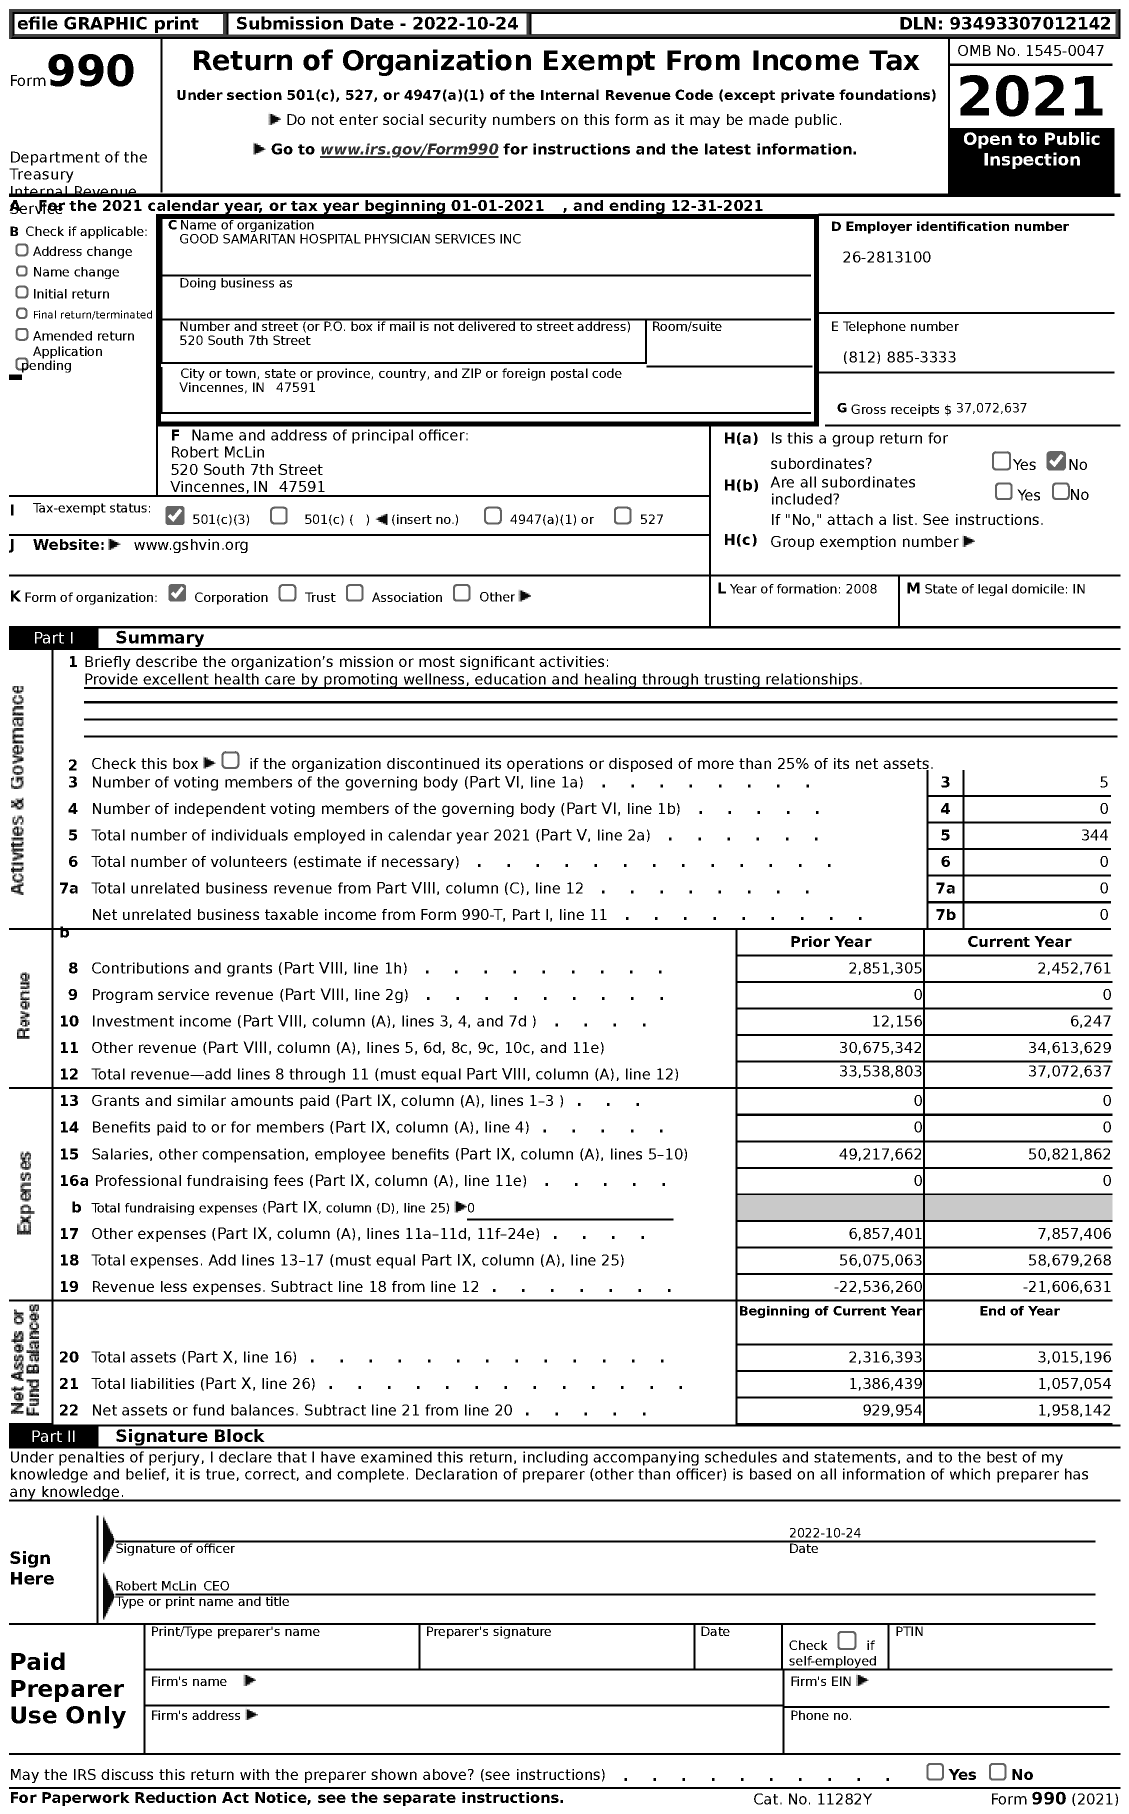 Image of first page of 2021 Form 990 for Good Samaritan Hospital Physician Services